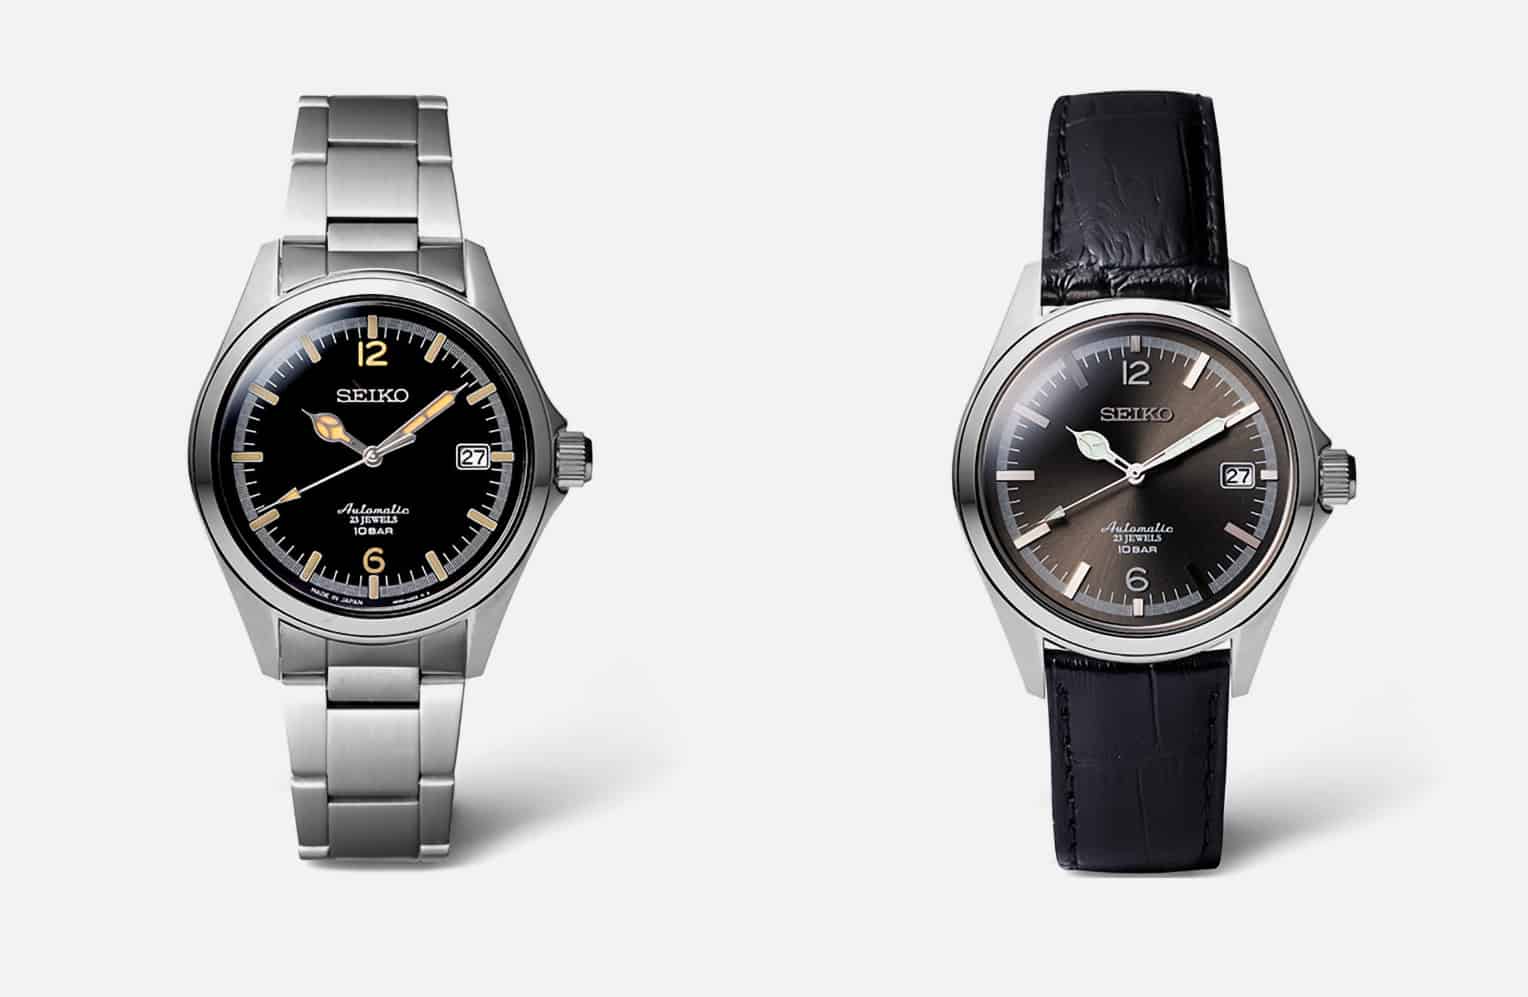 Seiko Teams Up With Japanese Retailer TiCTAC for Two JDM 